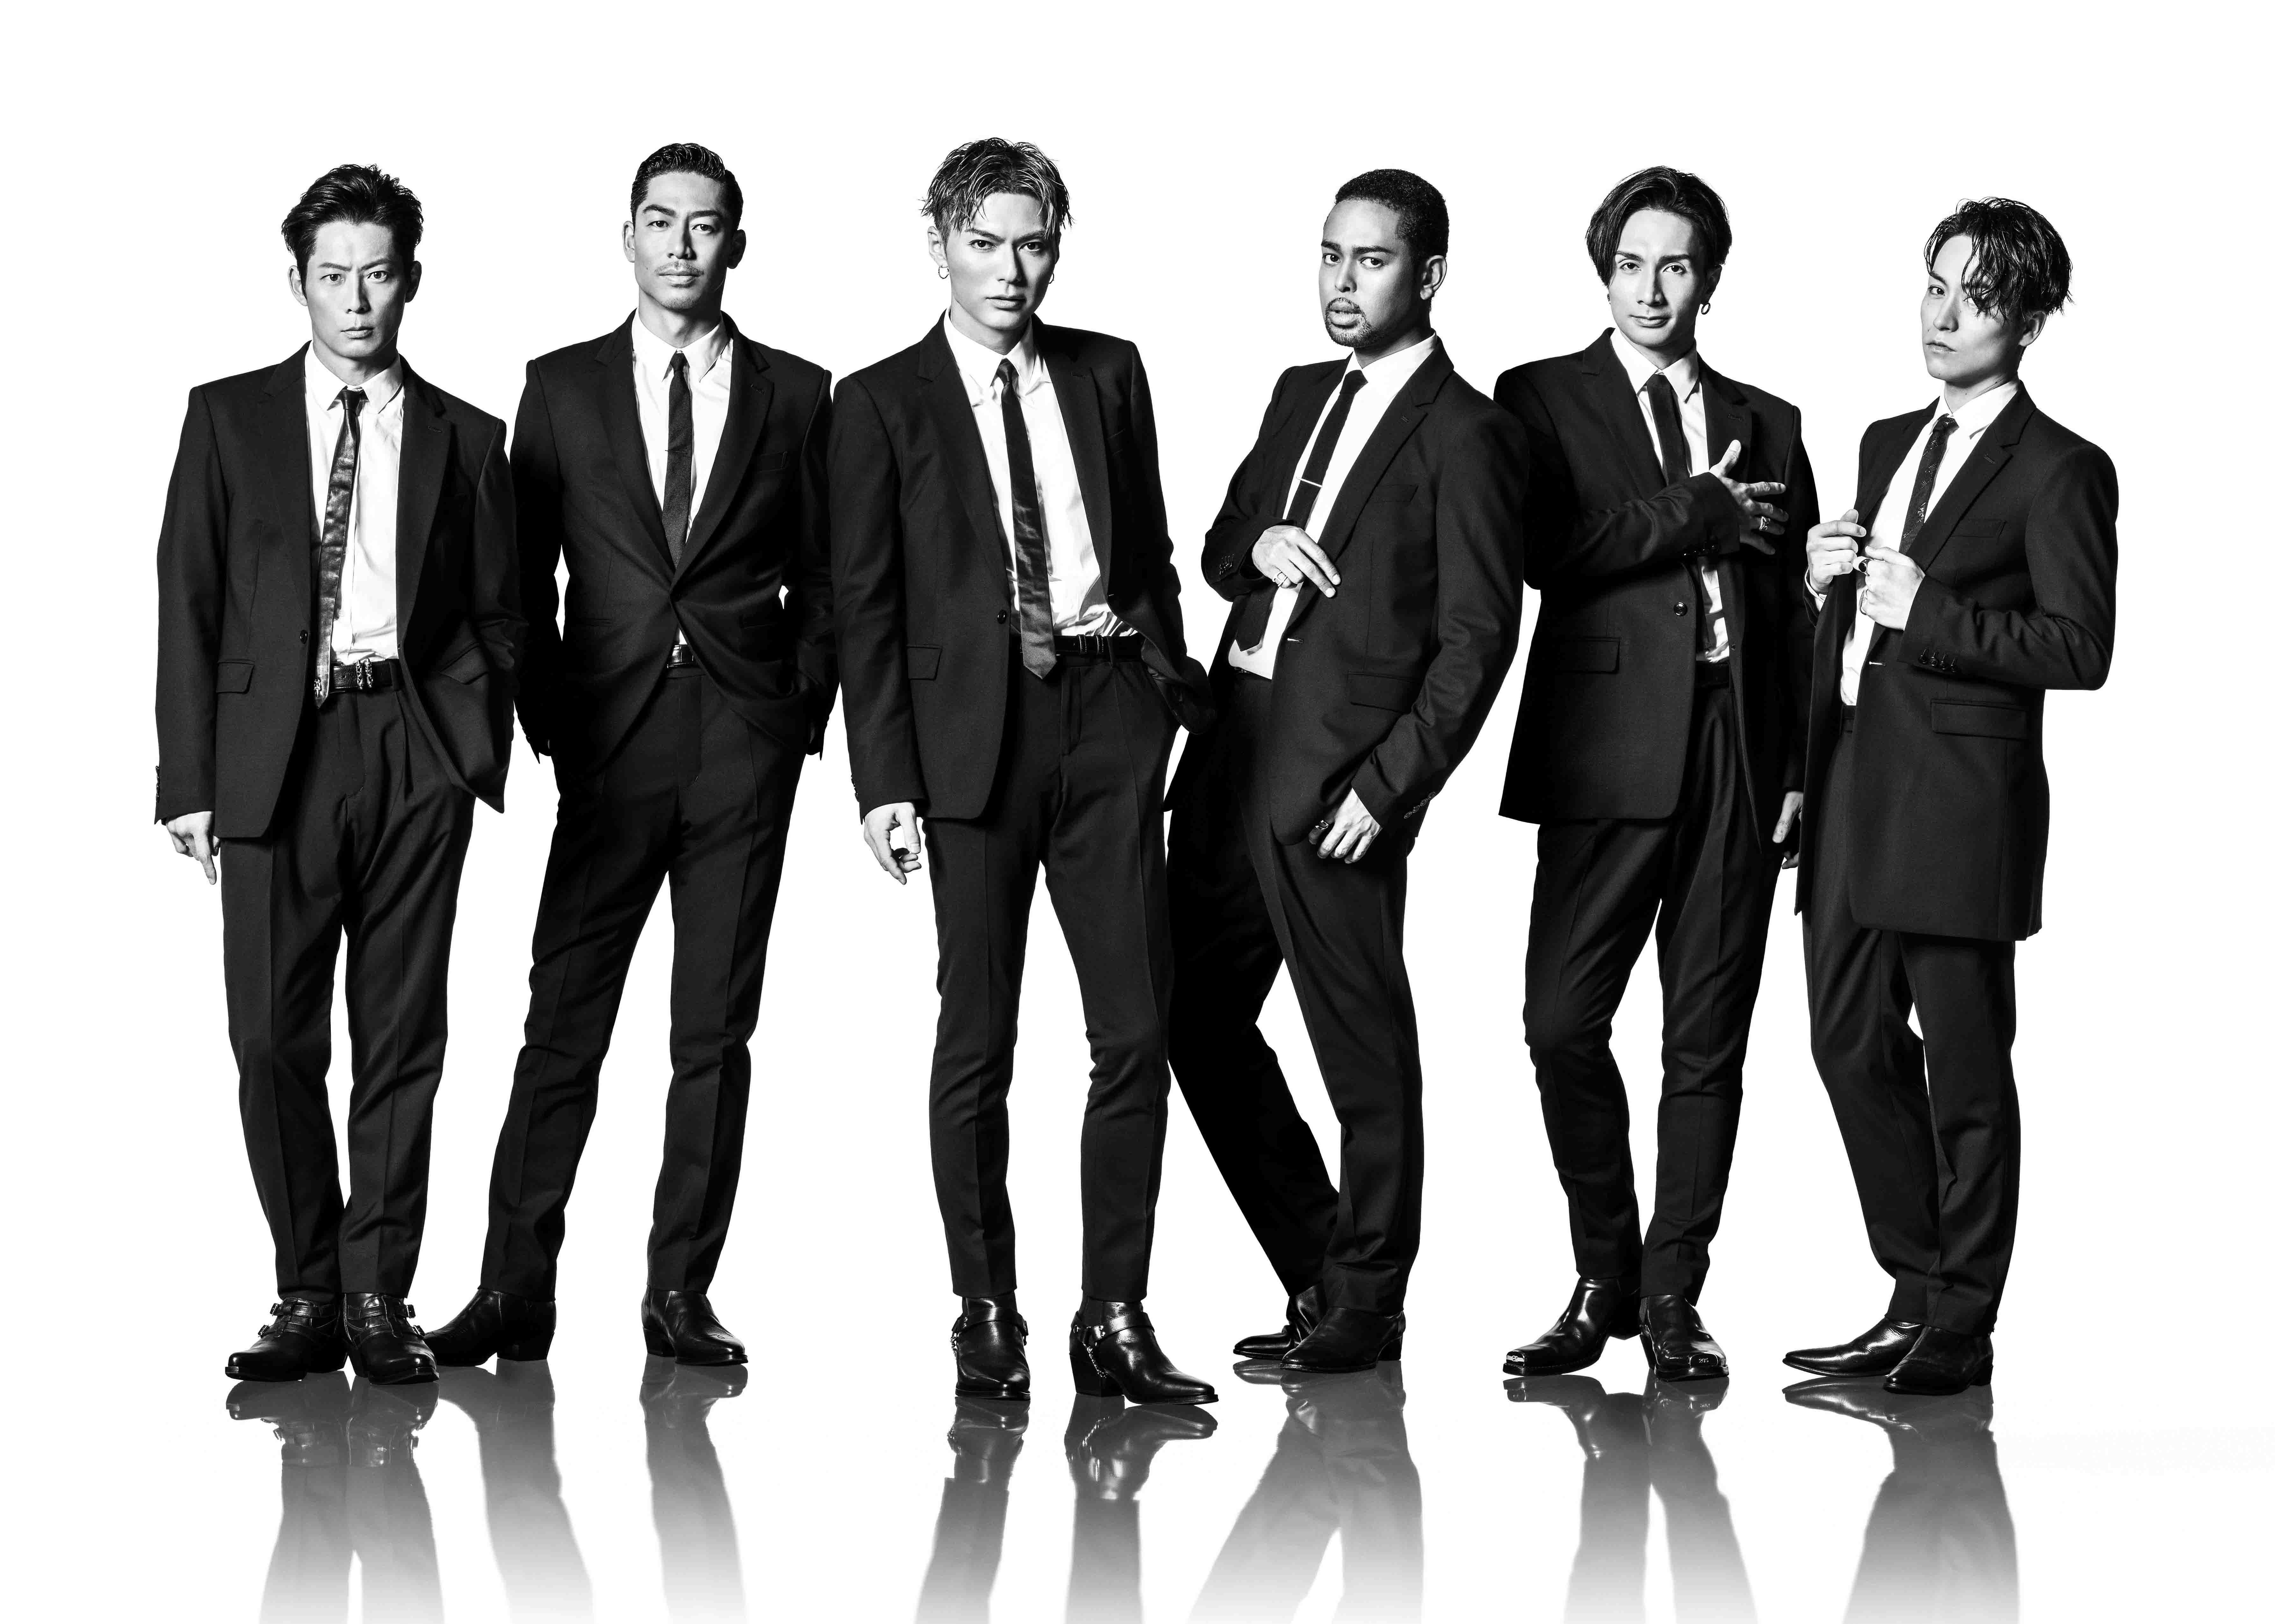 Exile 三代目jsb High Low The Live などライブ映像を期間限定で無料公開 Ldh Japan公式youtubeで Spice エンタメ特化型情報メディア スパイス